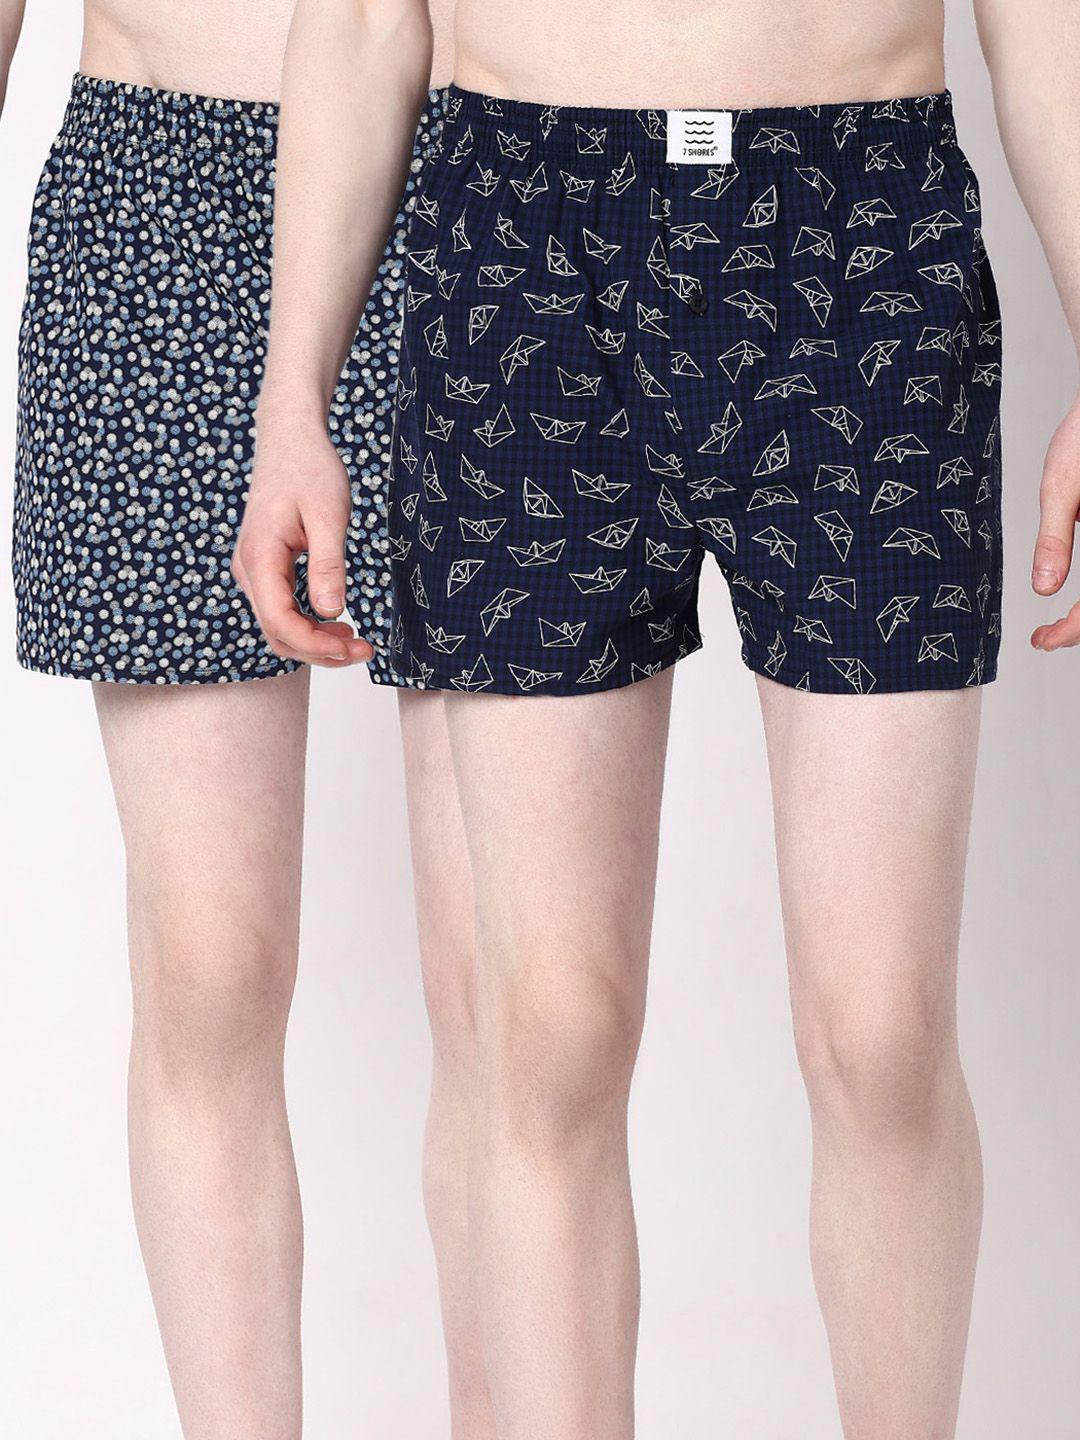 7shores-pack-of-2-printed-cotton-breathable-boxers-bst-005